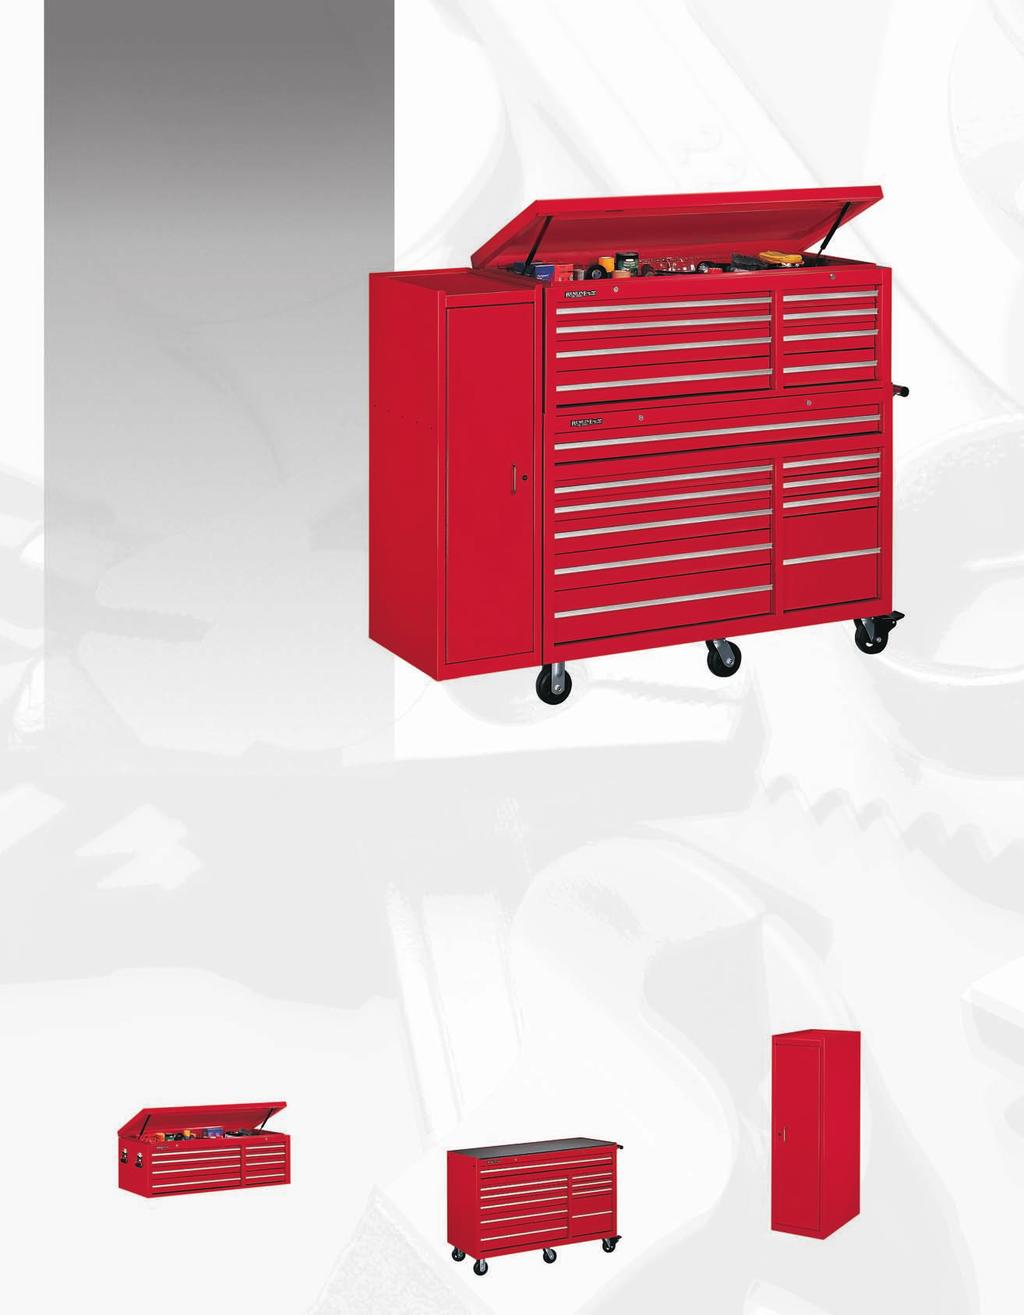 56 Mega Wagon Tool Center 3 piece set Virtually a tool room on wheels. Heavy gauge, all steel, double wall construction supports heaviest loads.